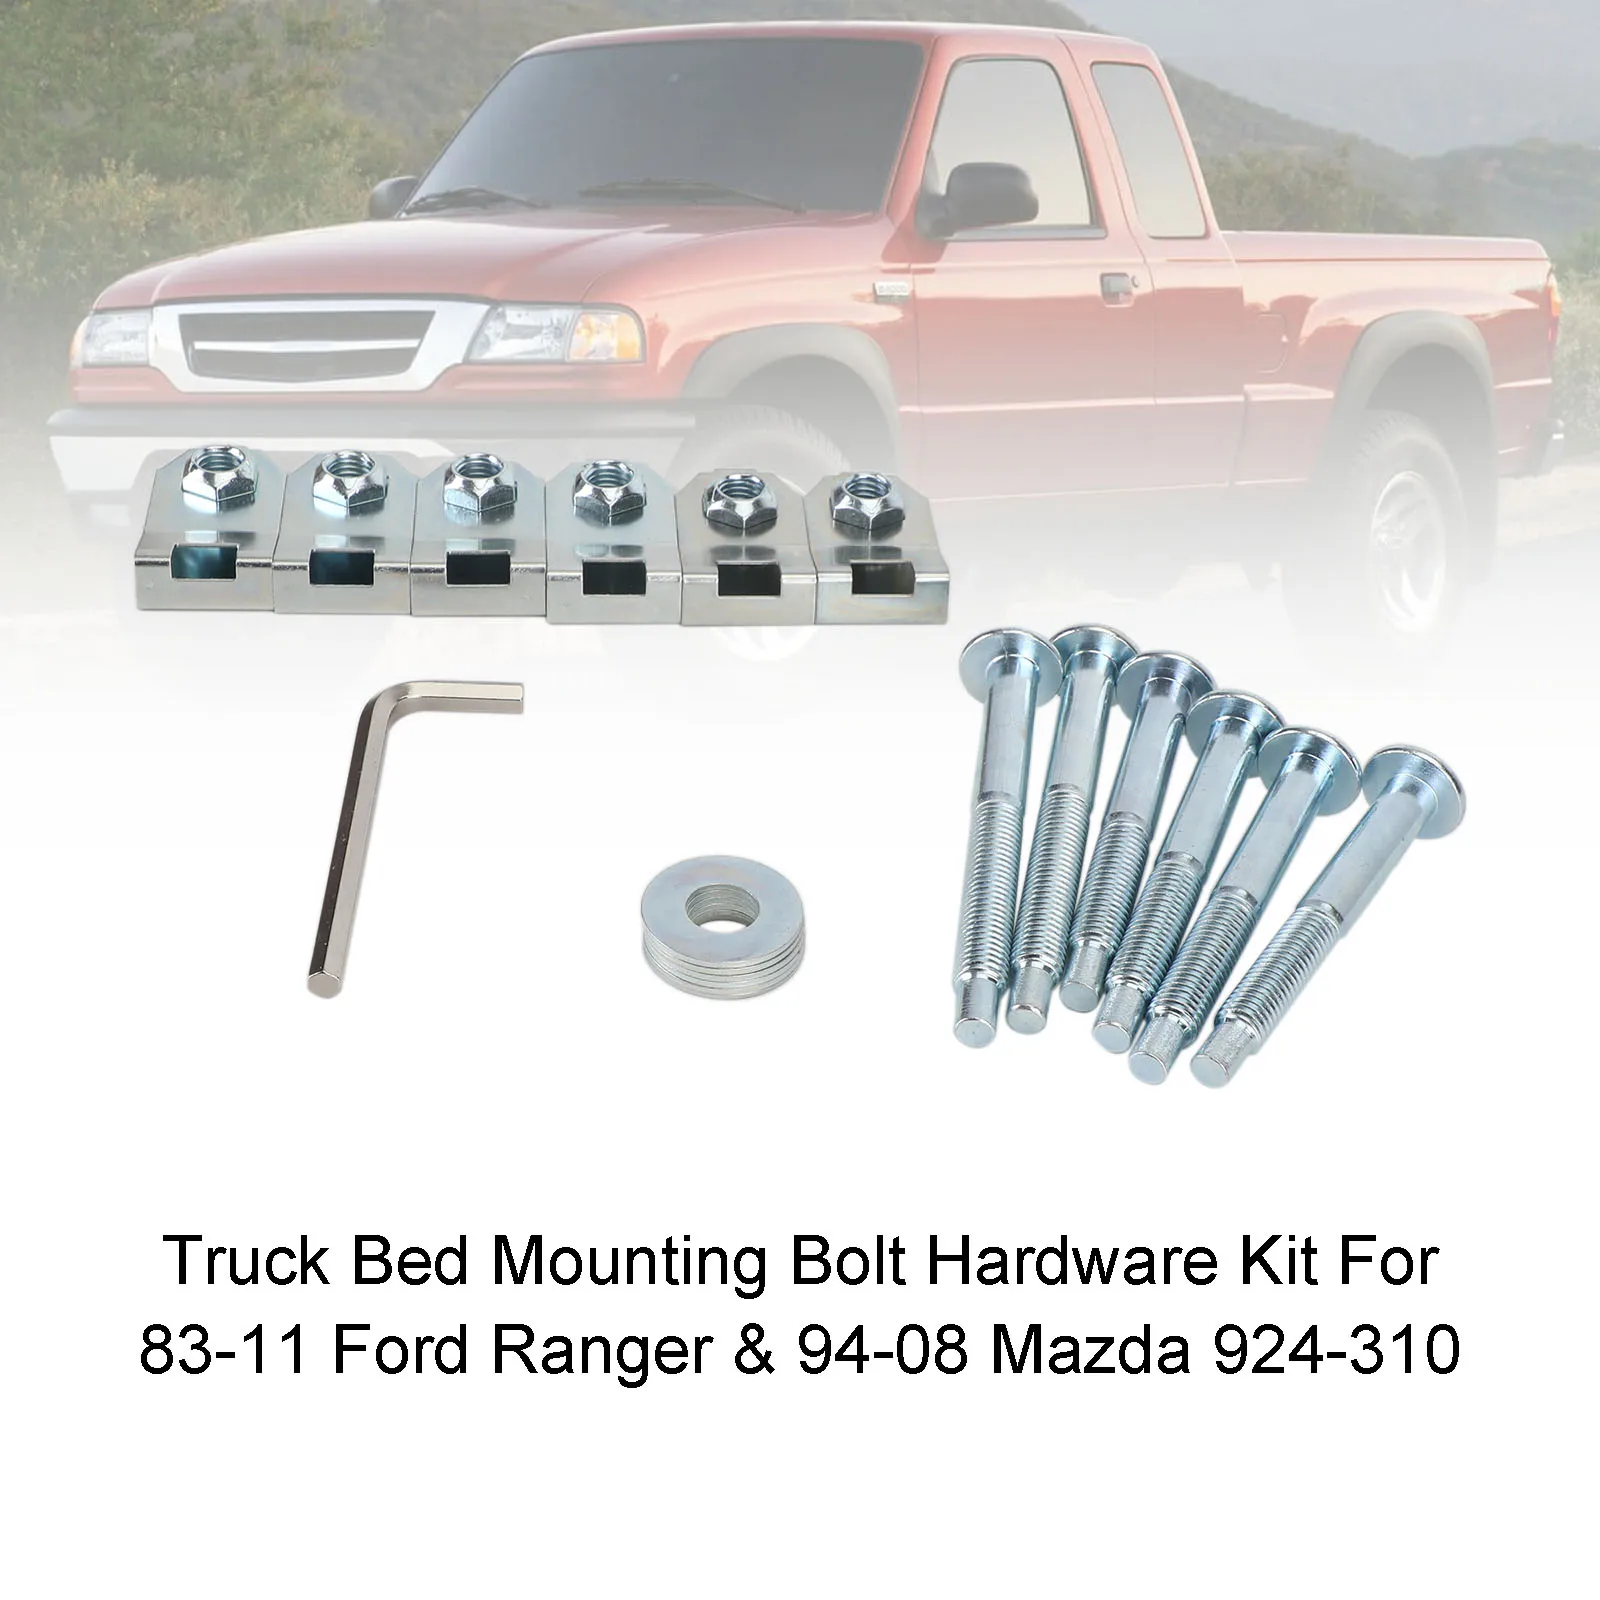 

Artudatech Truck Bed Mounting Bolt Hardware Kit For 83-11 Ford Ranger & 94-08 Mazda 924-310 Car Accessories